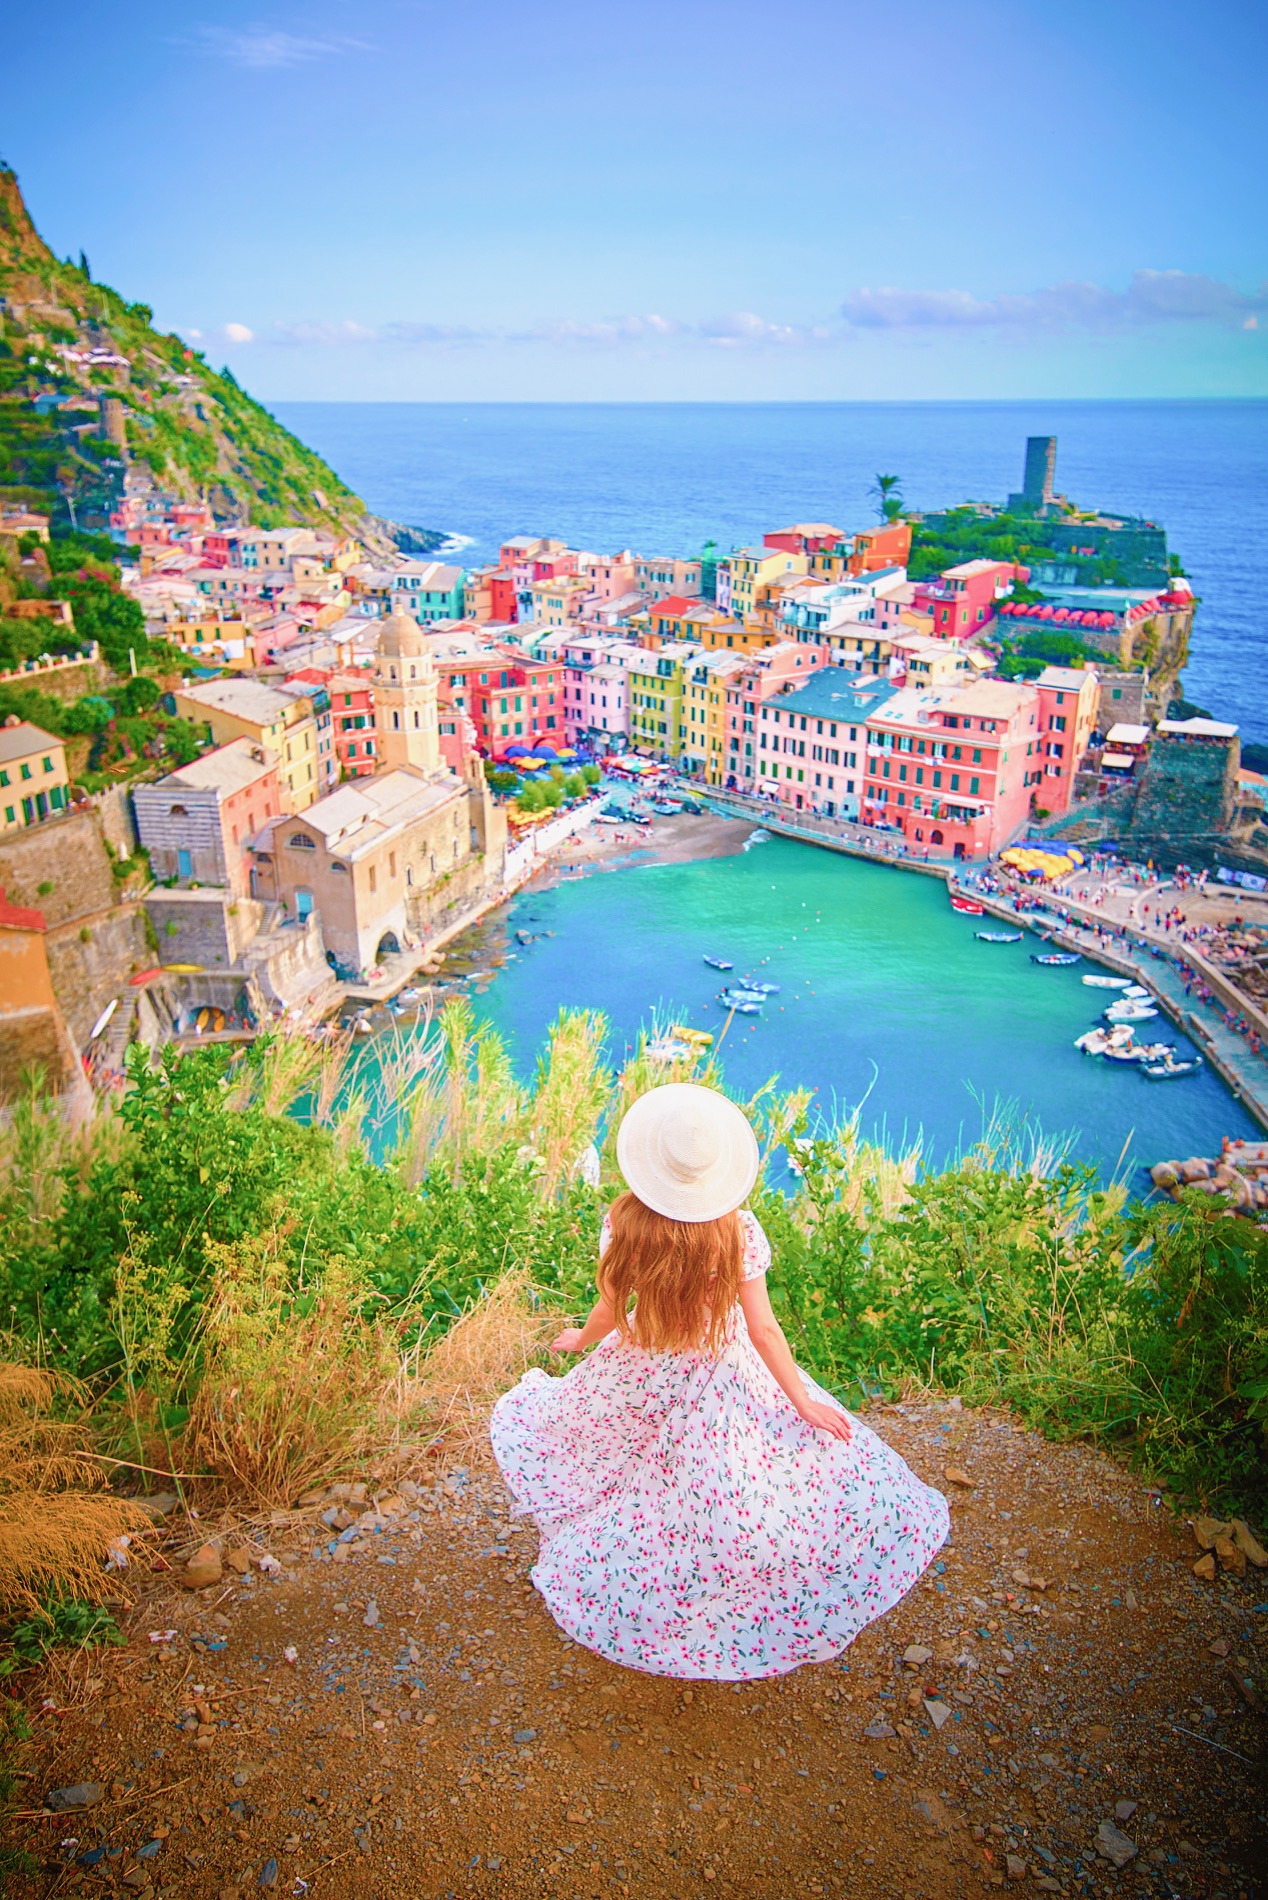 Woman in a floral dress and sun hat on a cliff overlooking the harbor and colorful buildings of Vernazza.